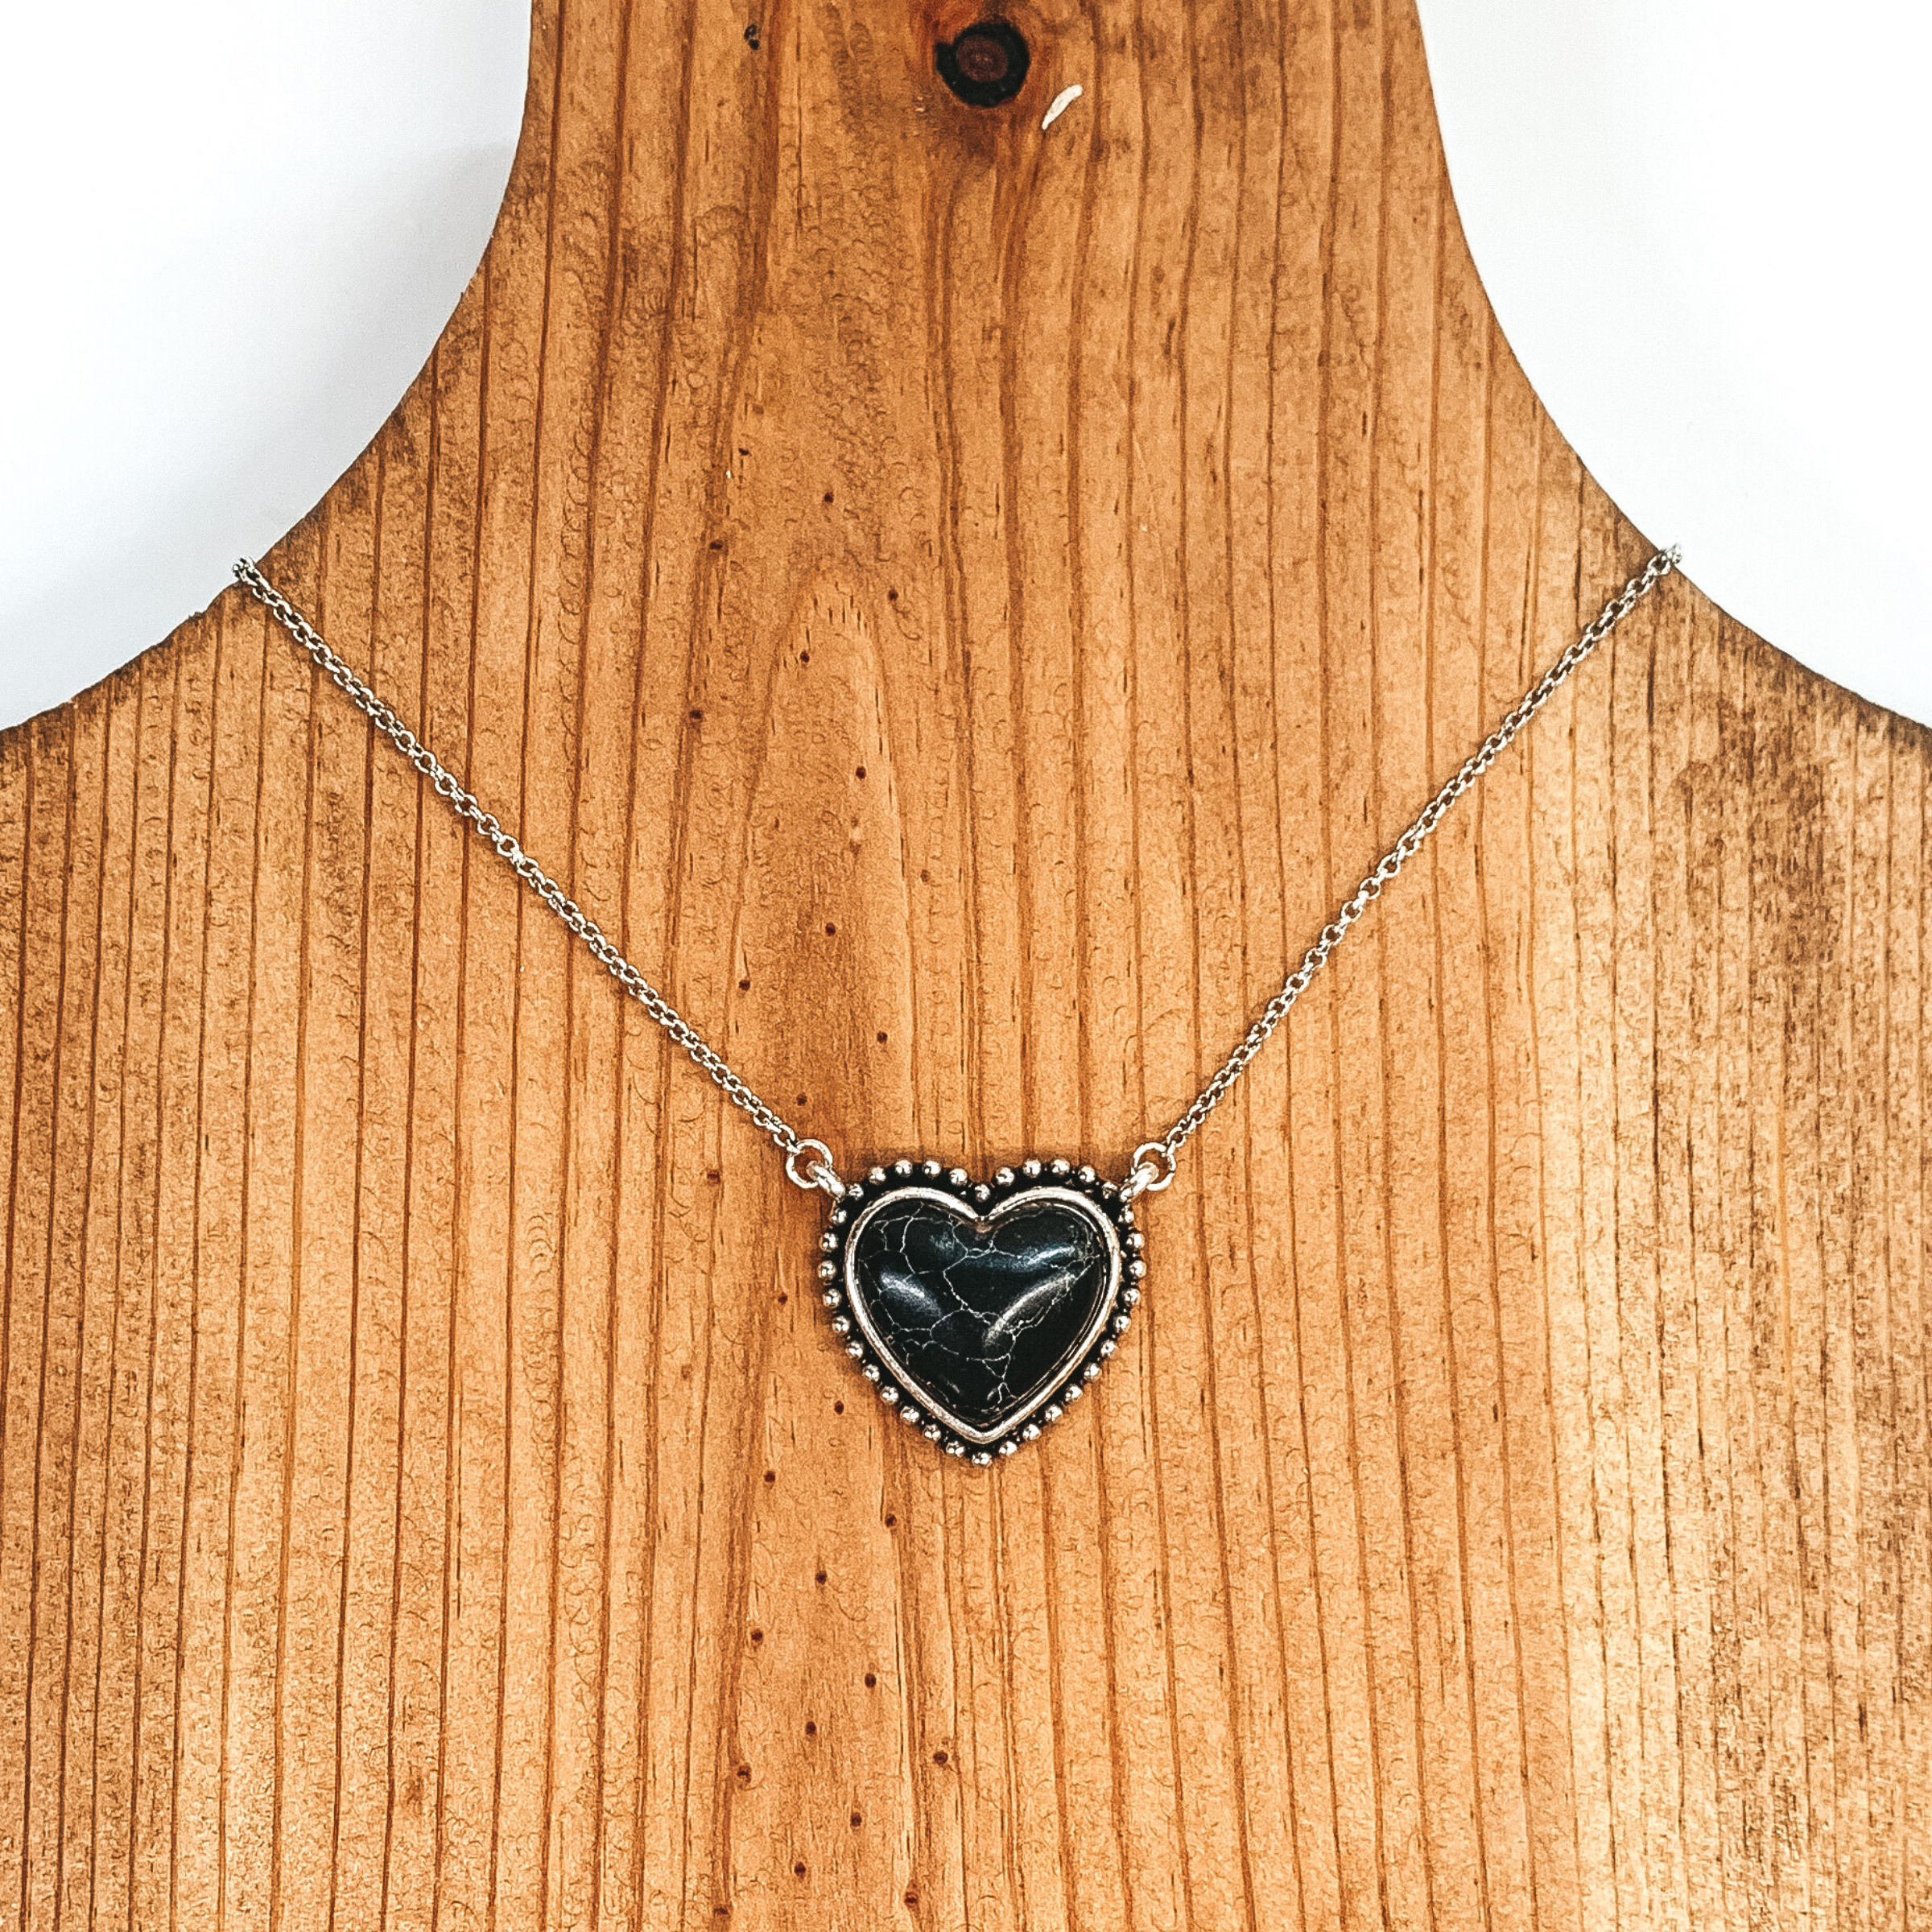 Silver chained necklace with a small black, heart shaped stone pendant. This necklace is pictured laying on a brown necklace holder on a white and black background.